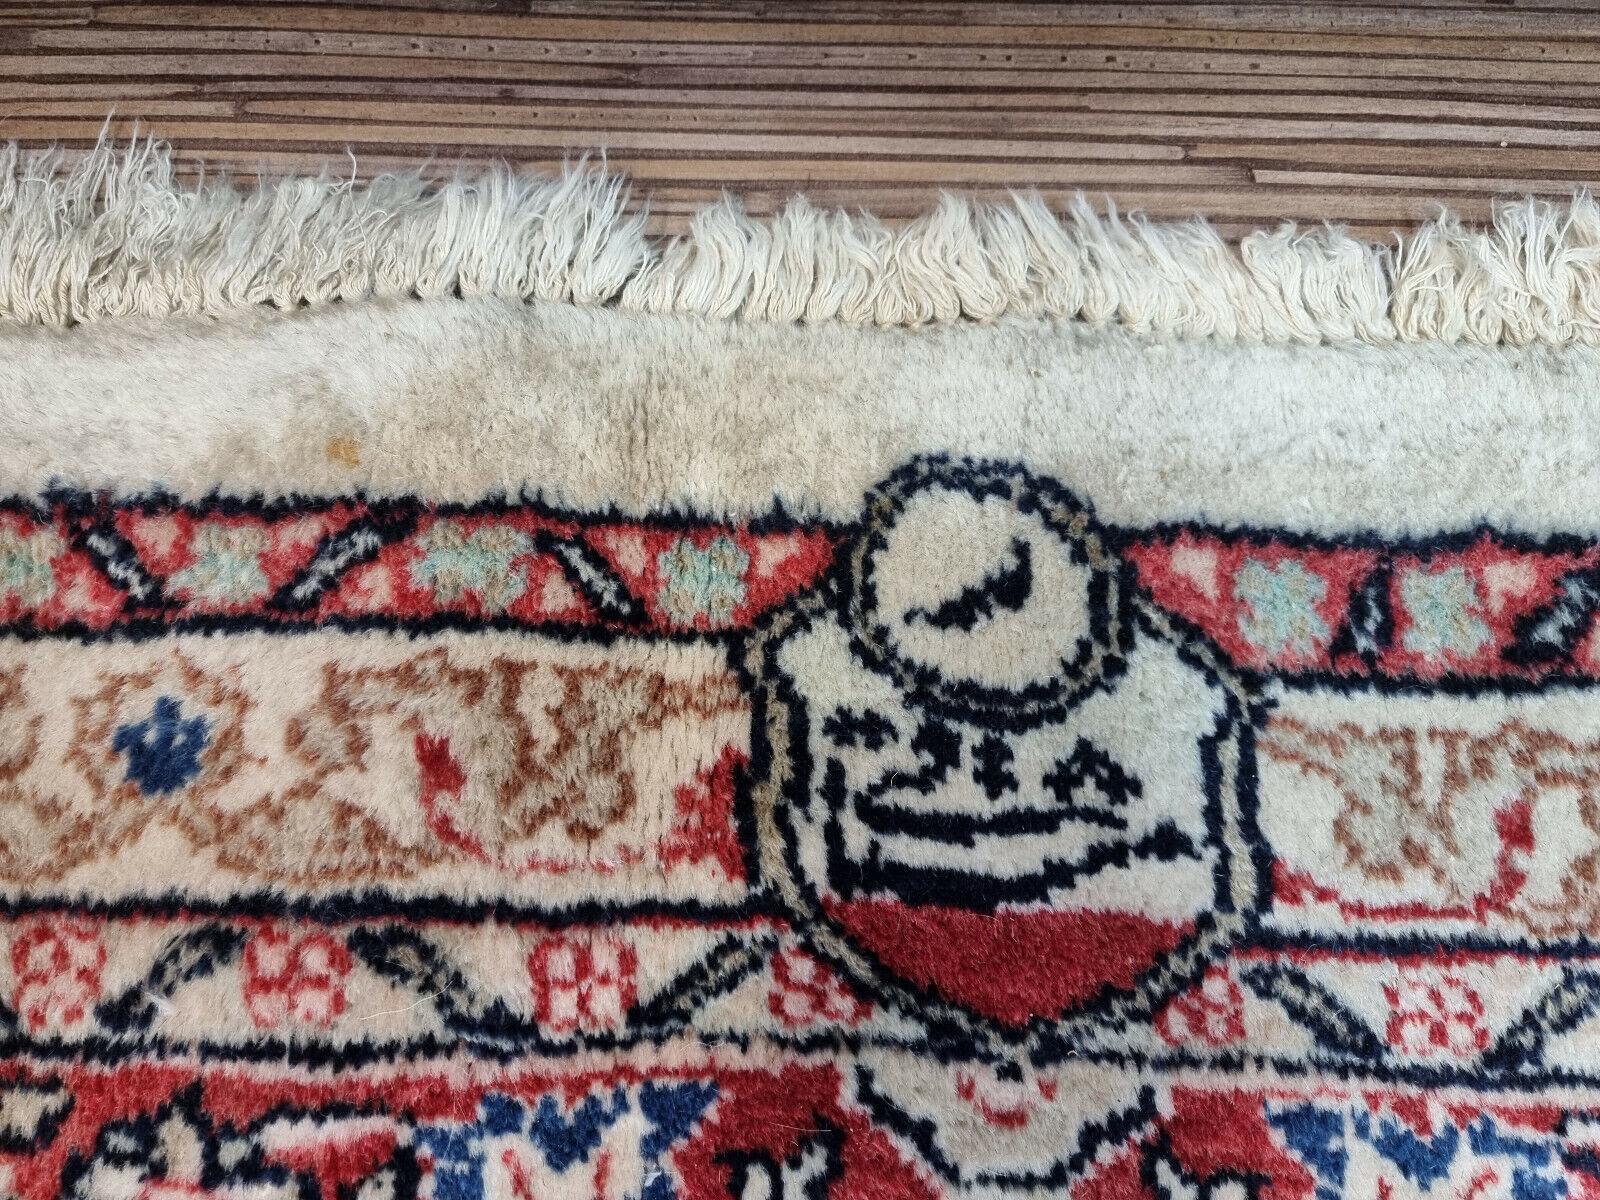 Late 20th Century Handmade Vintage Persian Style Sarouk Oversize Rug 10.4' x 13.2', 1970s - 1D67 For Sale